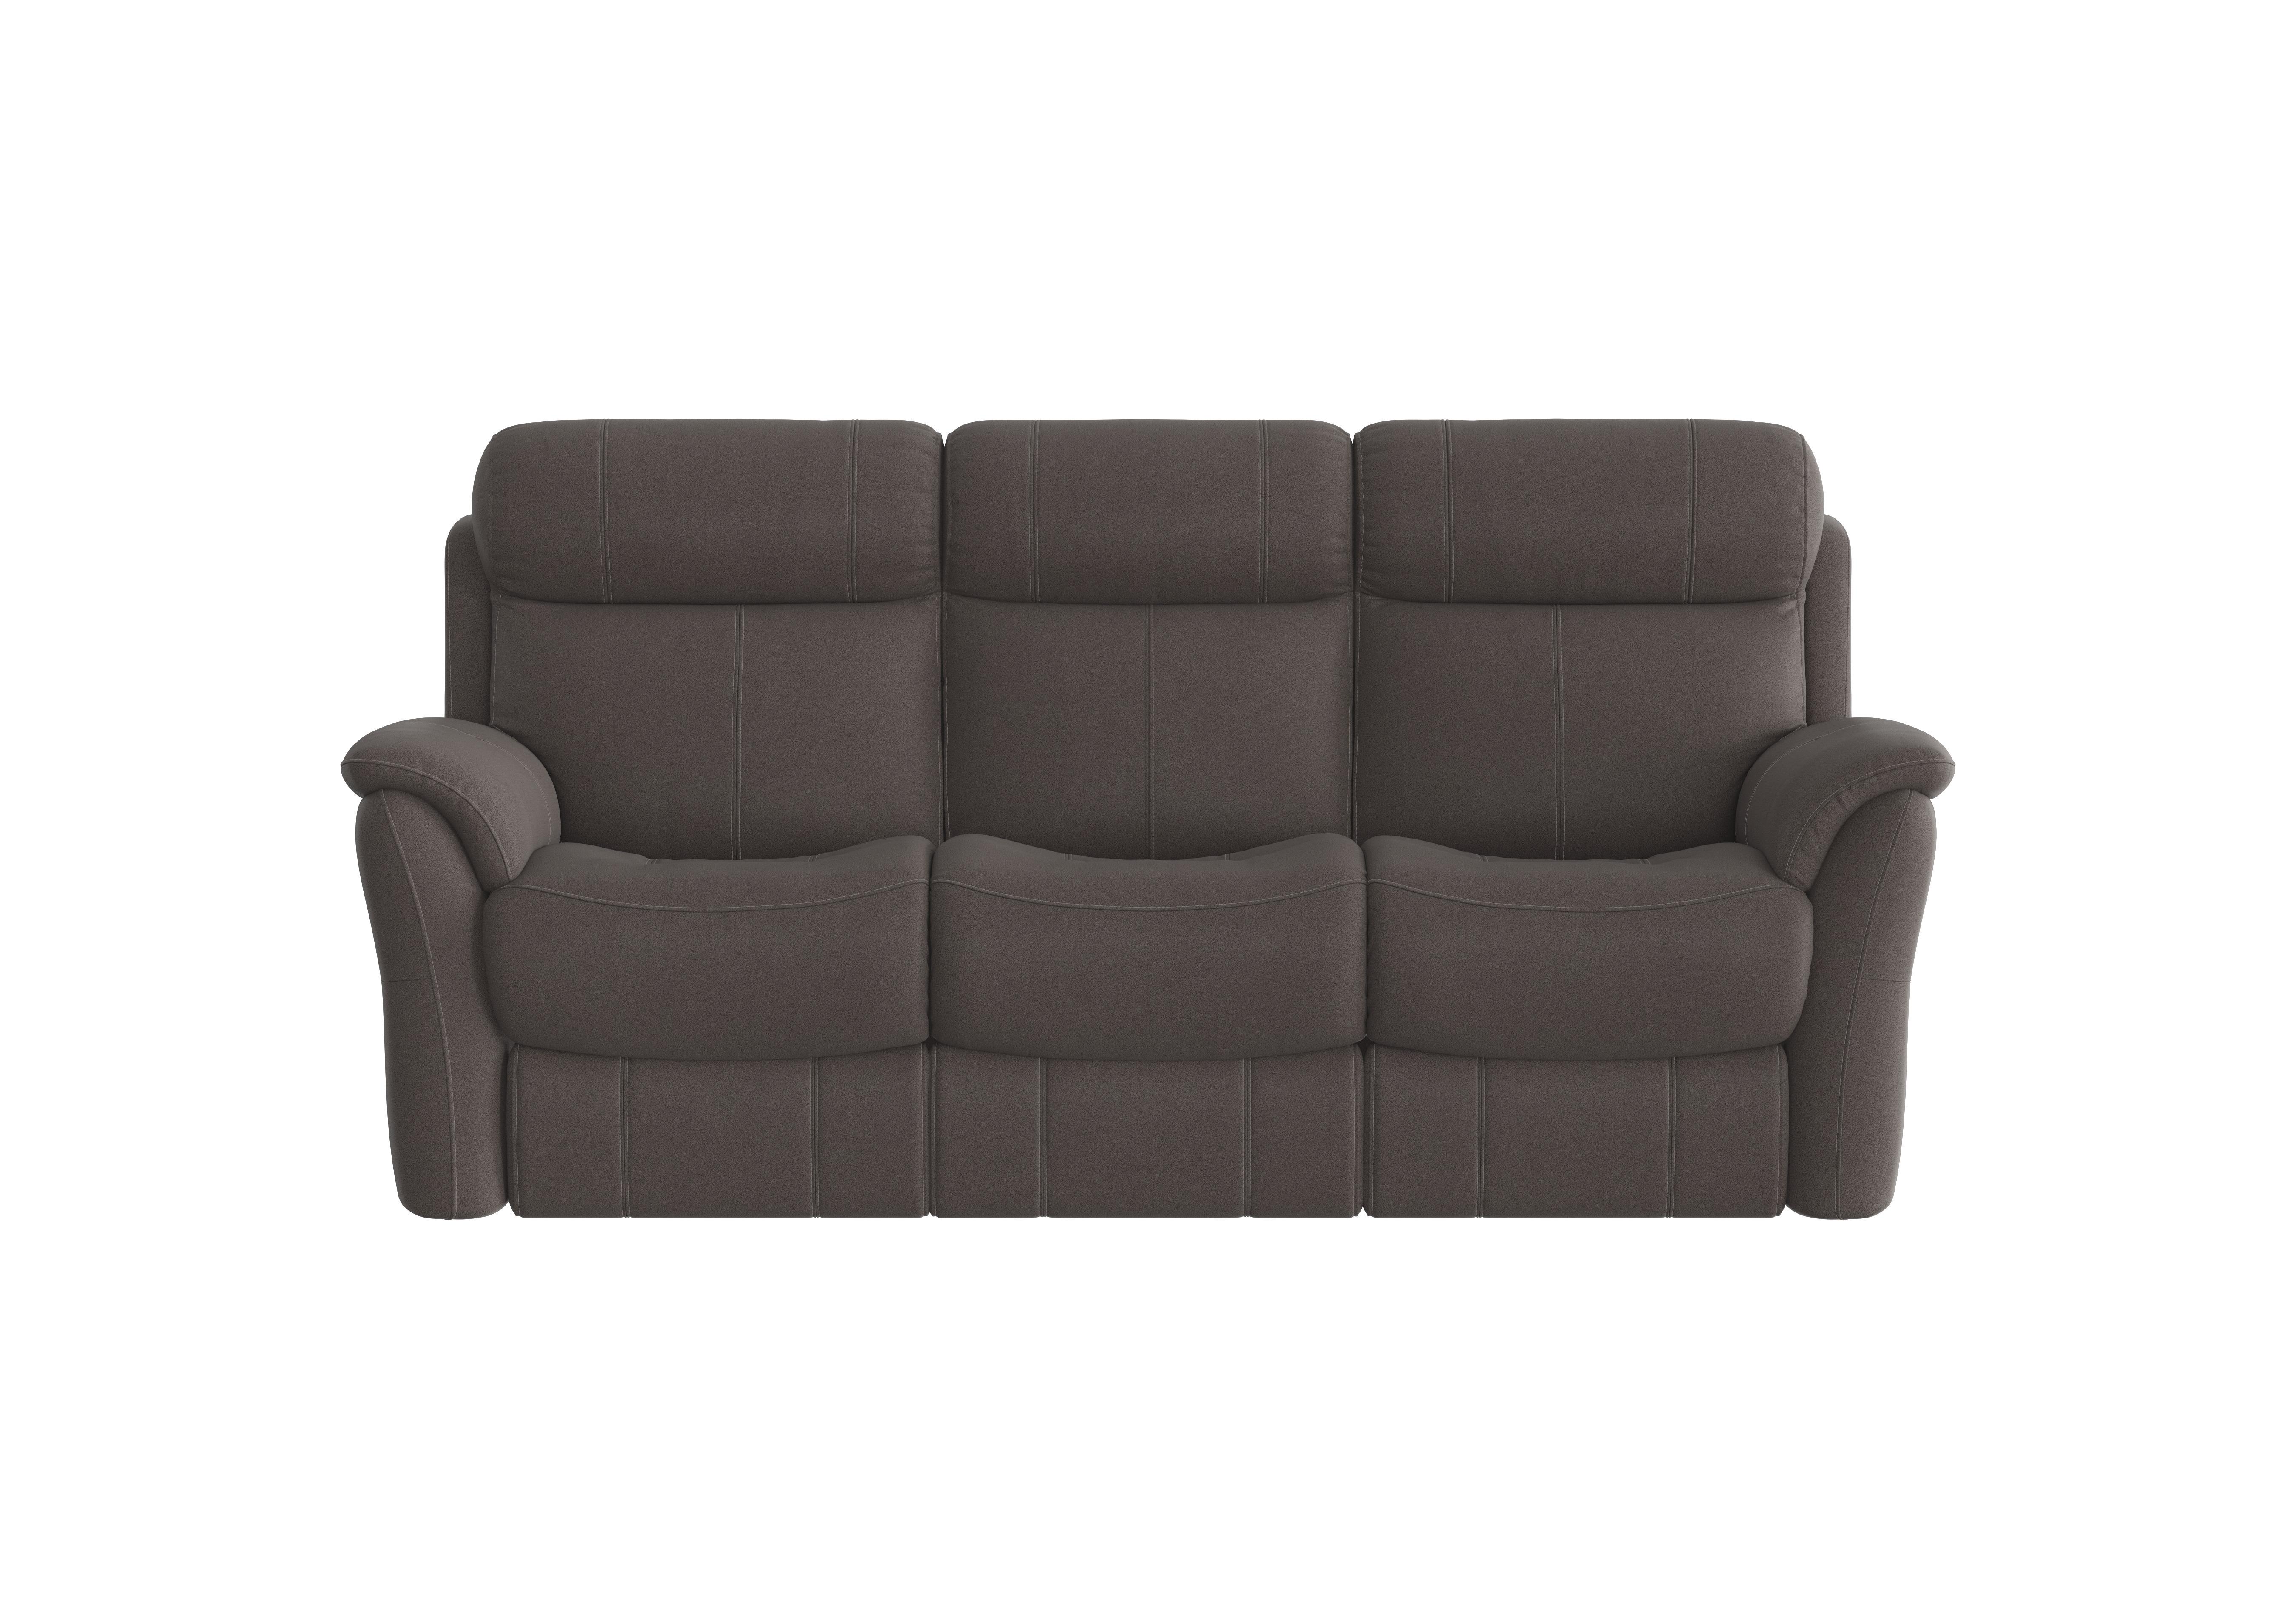 Relax Station Revive 3 Seater Fabric Sofa in Bfa-Blj-R16 Grey on Furniture Village